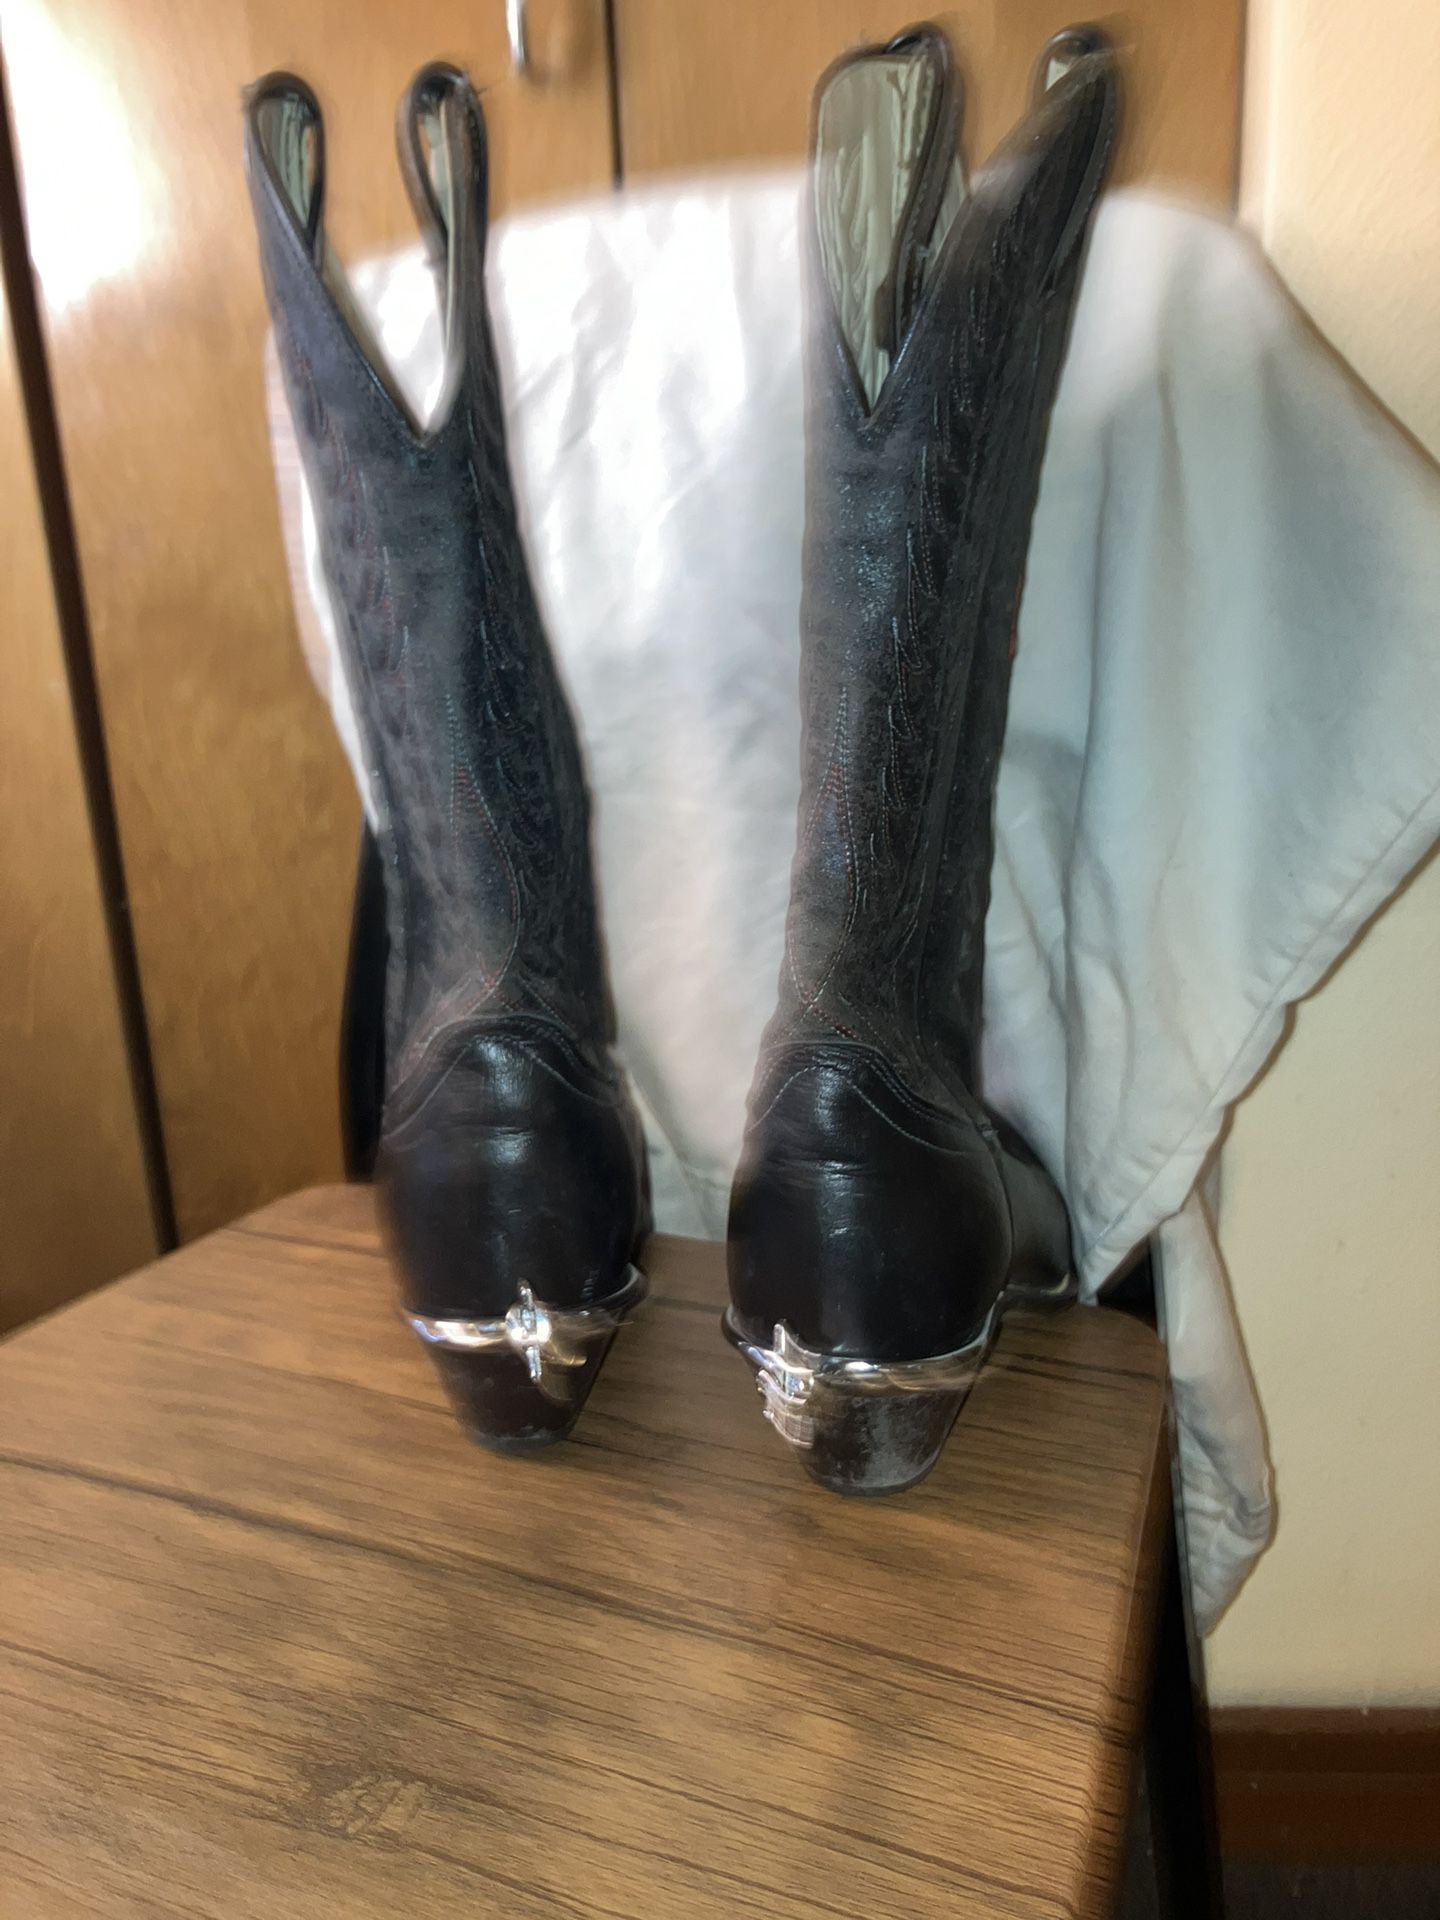 Men’s Sheplers Cowboy Boots With Spurs Size 10